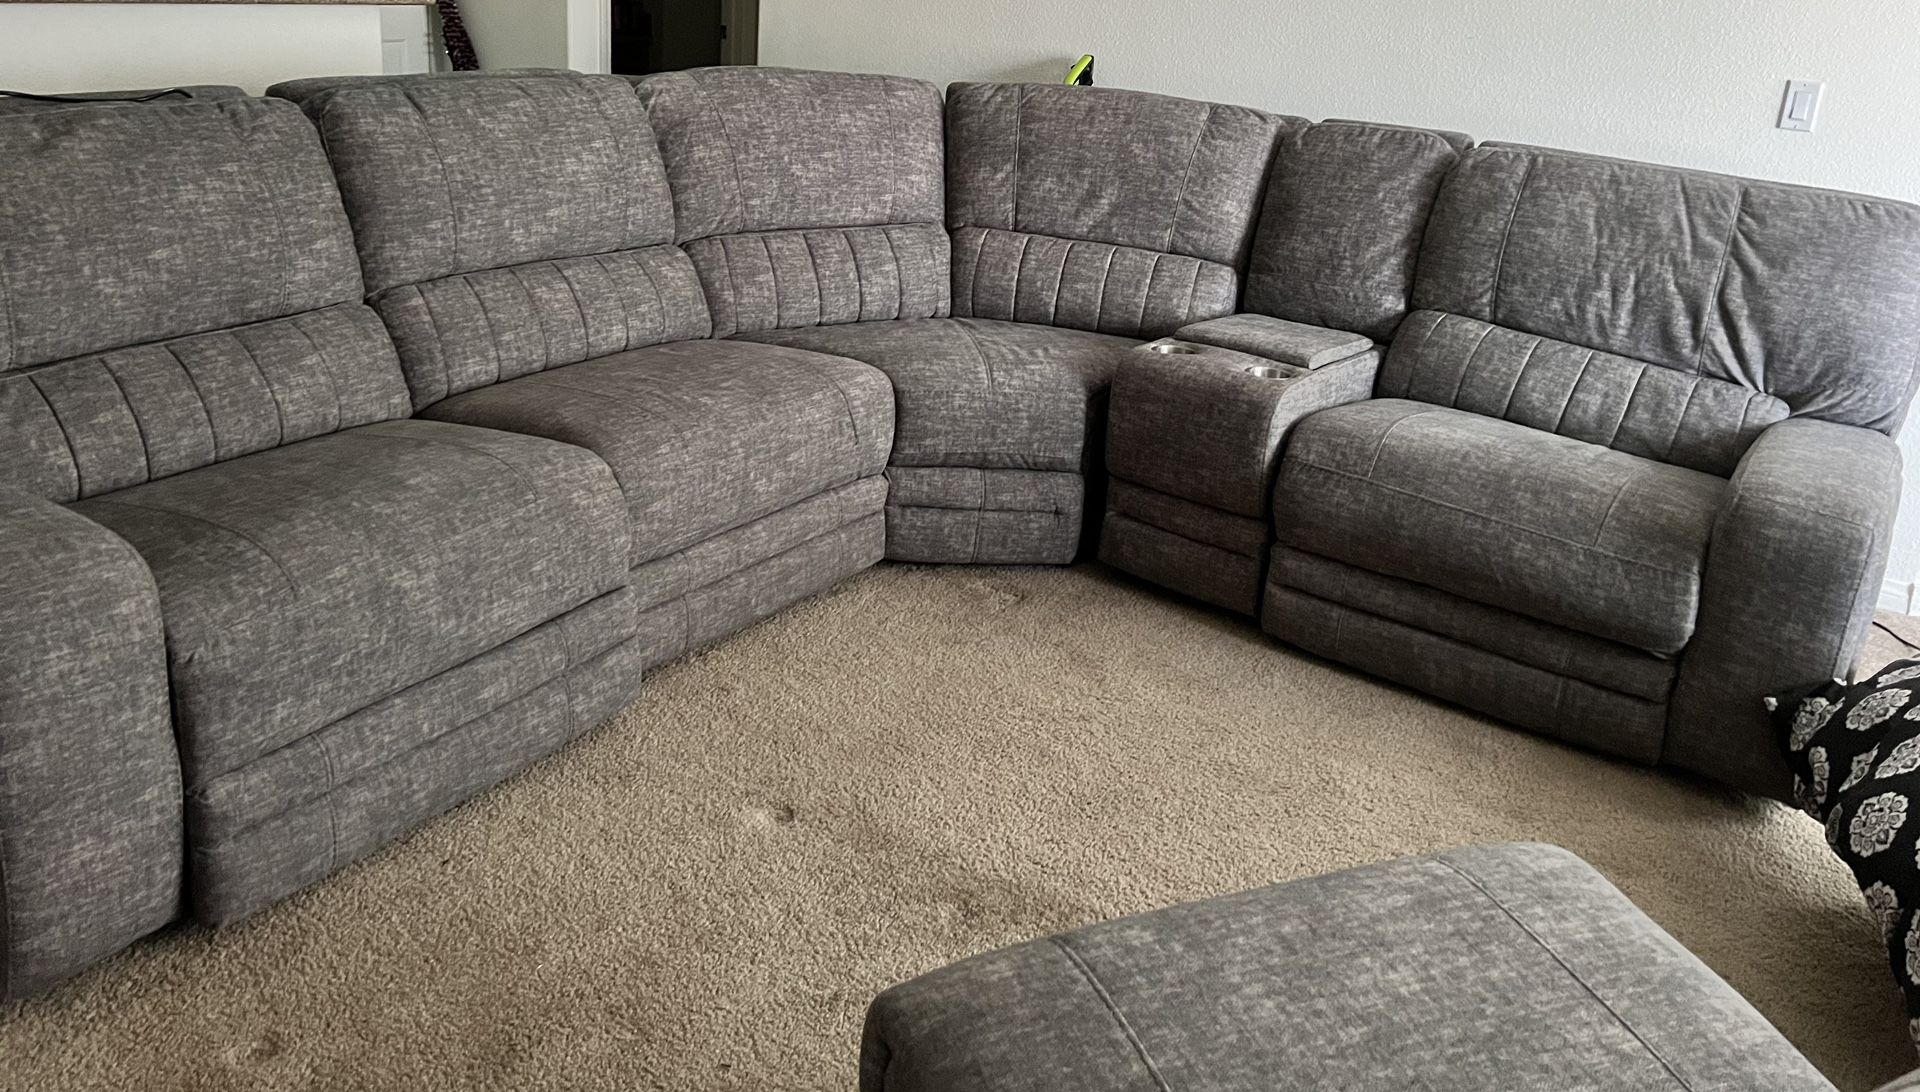 Recliner couch 